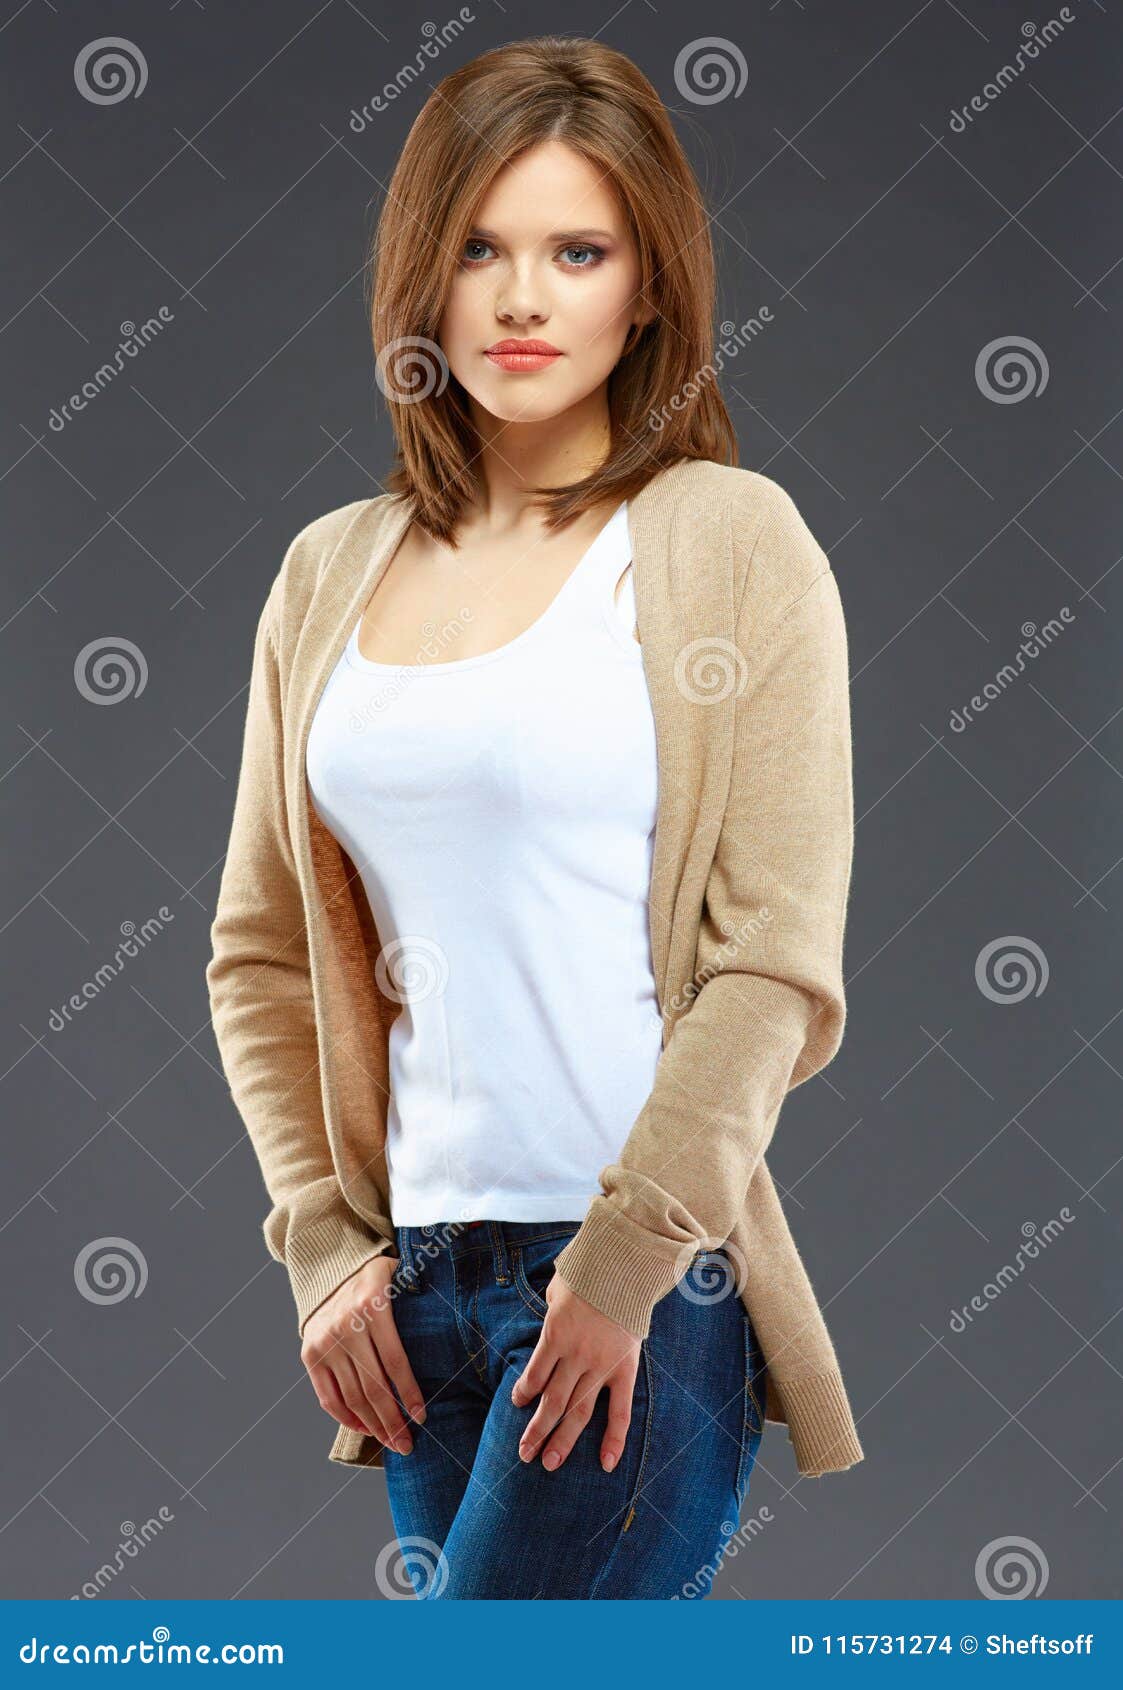 Premium Photo  Young beautiful girl wears casual clothes and